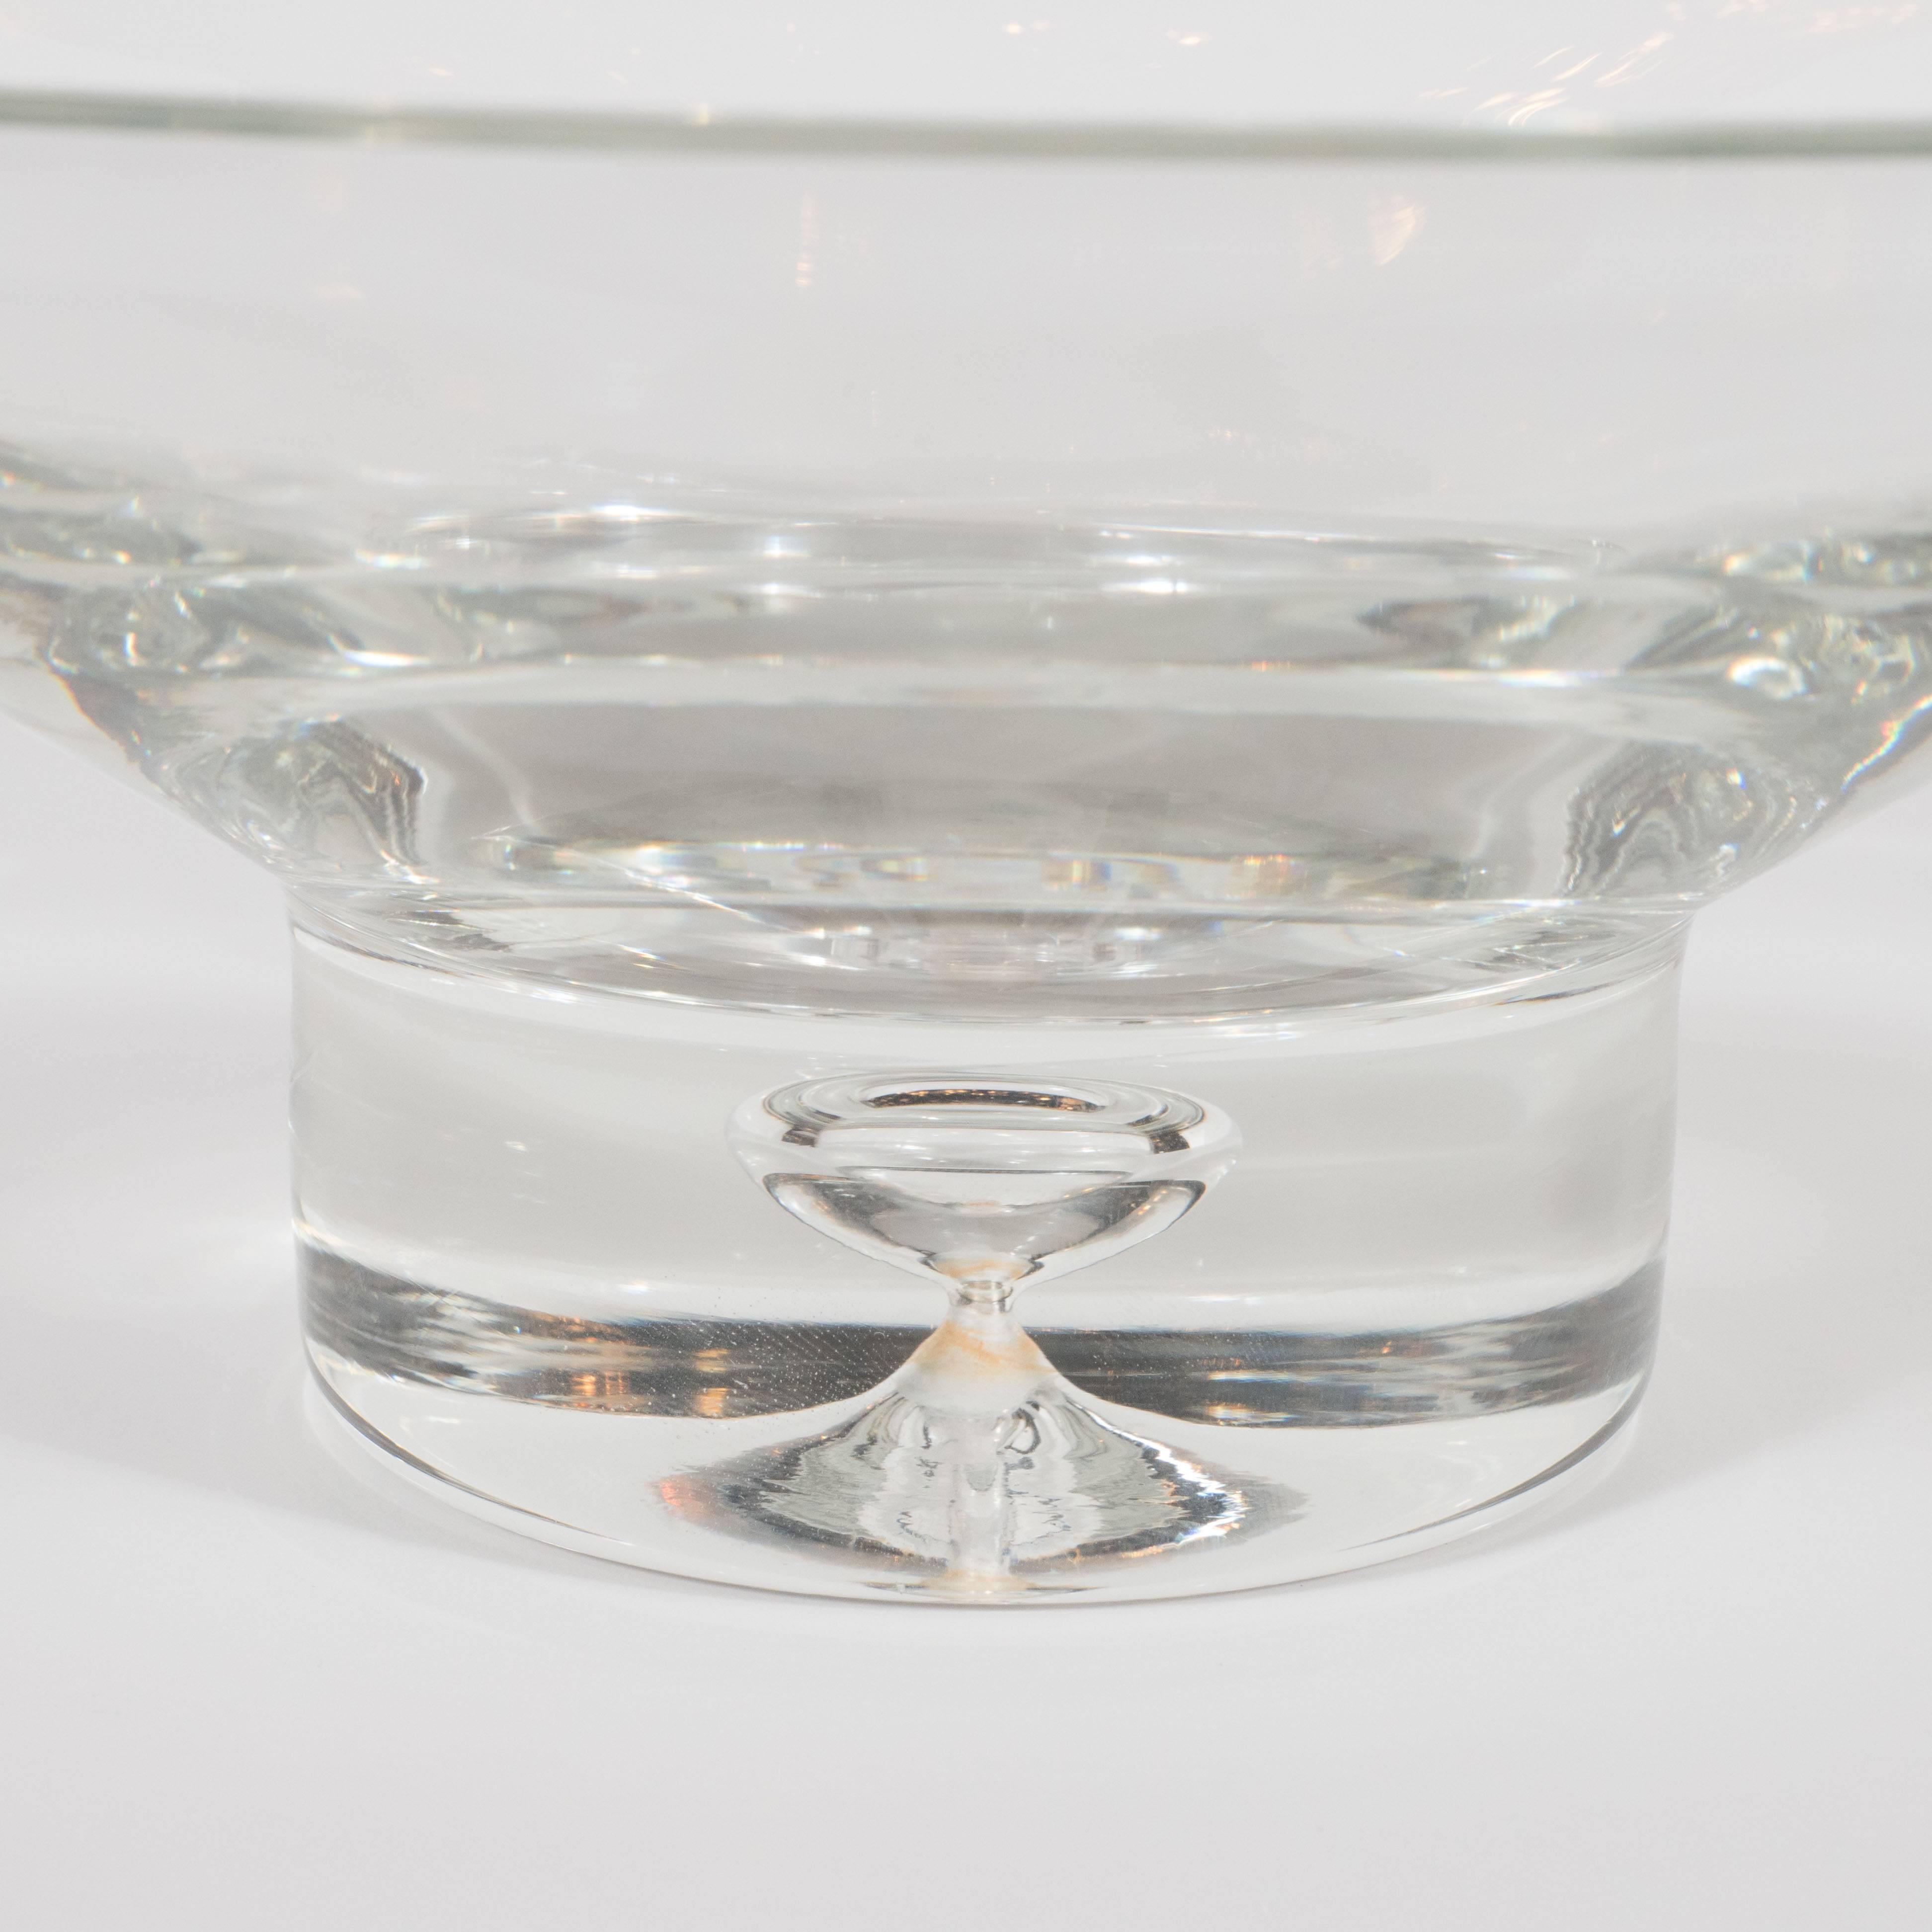 Late 20th Century Mid-Century Modern Bowl with Suspended Bubble Detail by Steuben Glass